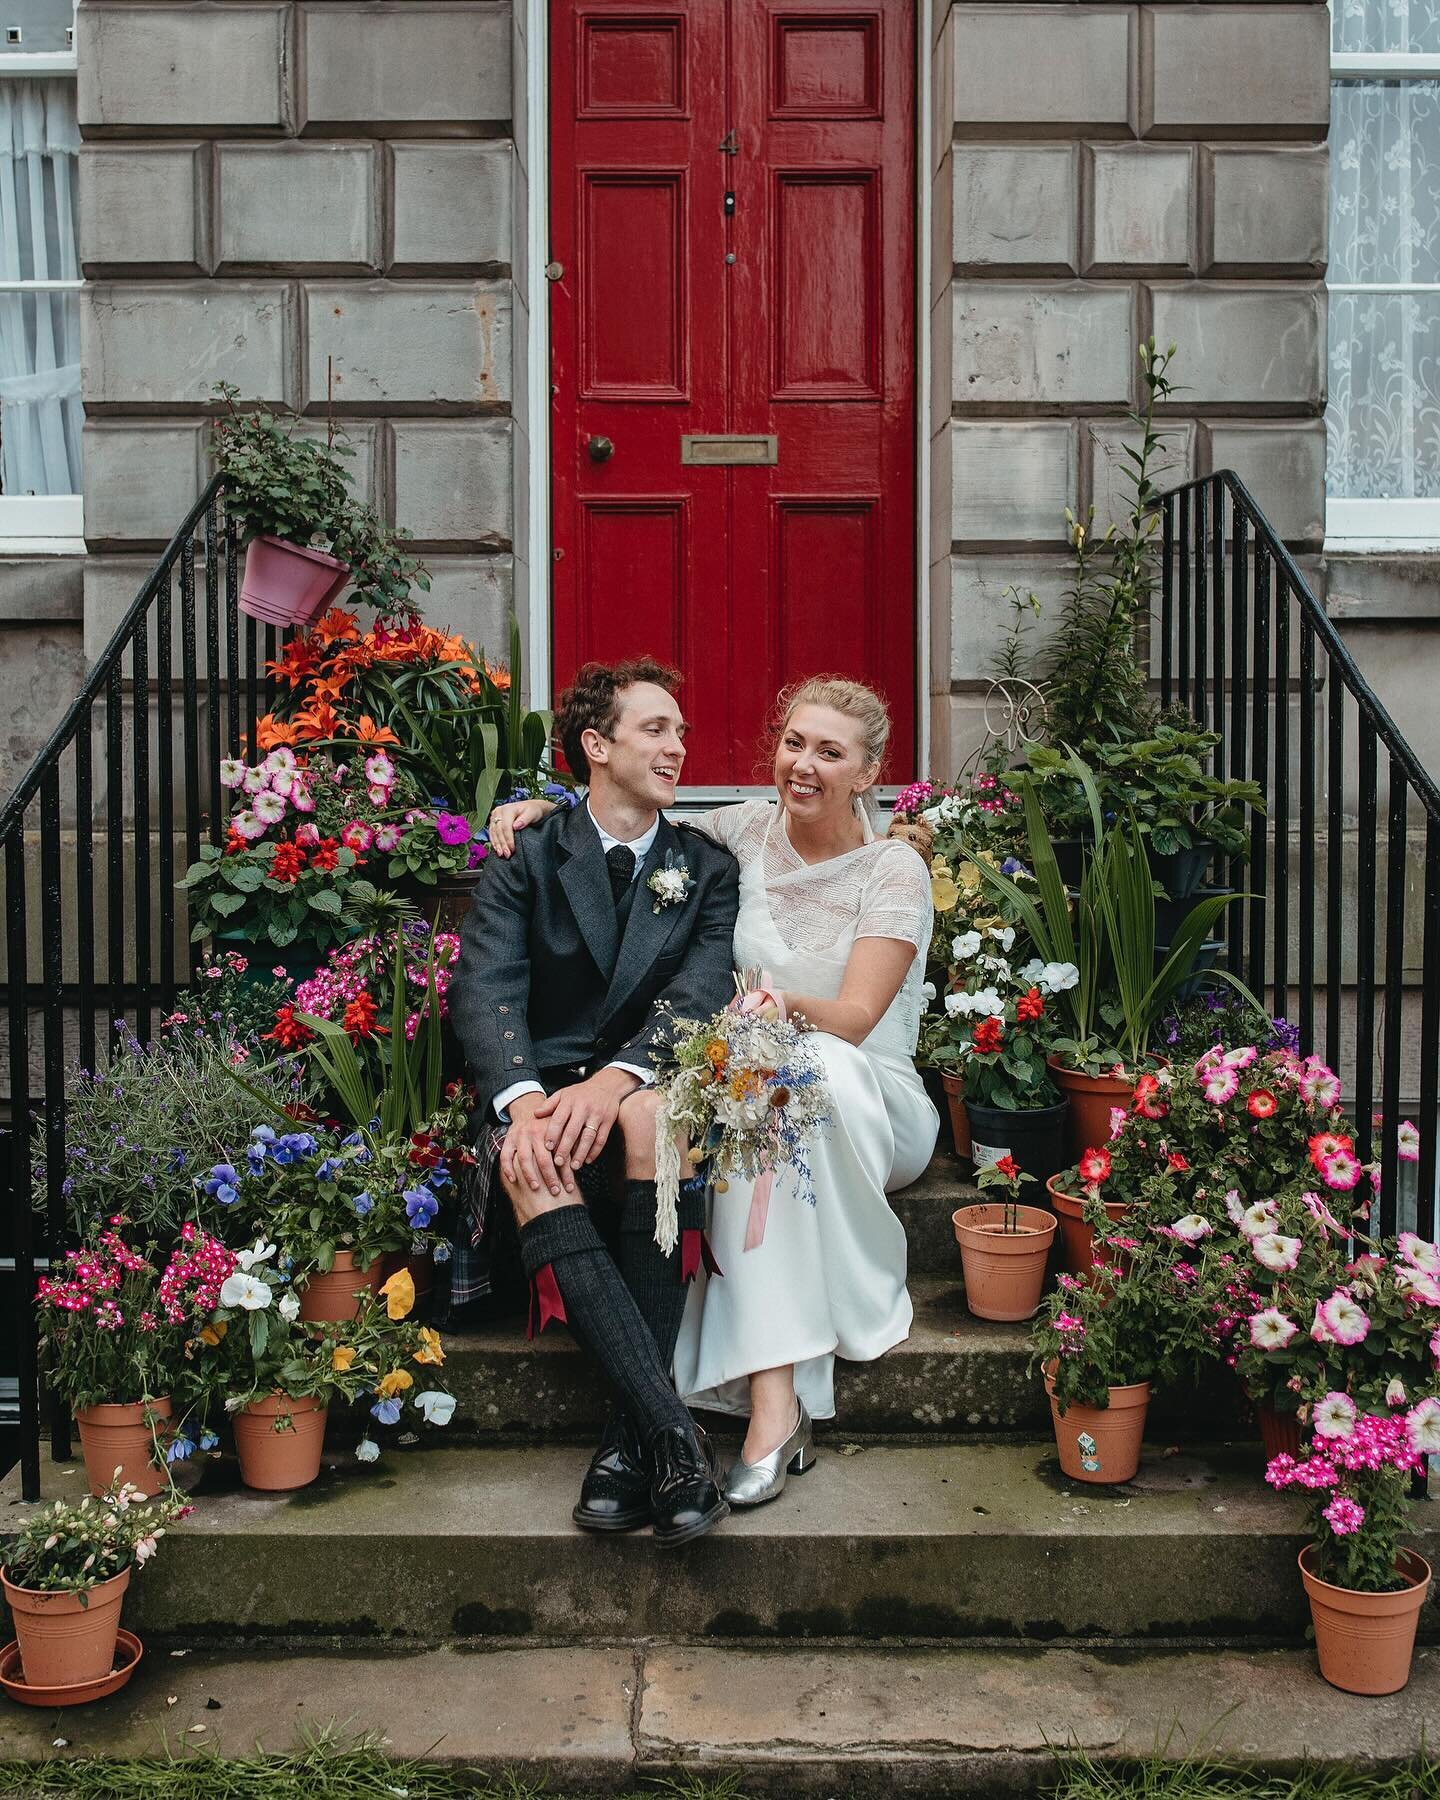 Super excited to be shooting lots of weddings in Edinburgh this year. Here&rsquo;s a favourite from Emily &amp; Doug&rsquo;s wonderful day a couple of years ago which included the most magical reception and dinner at the amazing @timberyard10, somewh